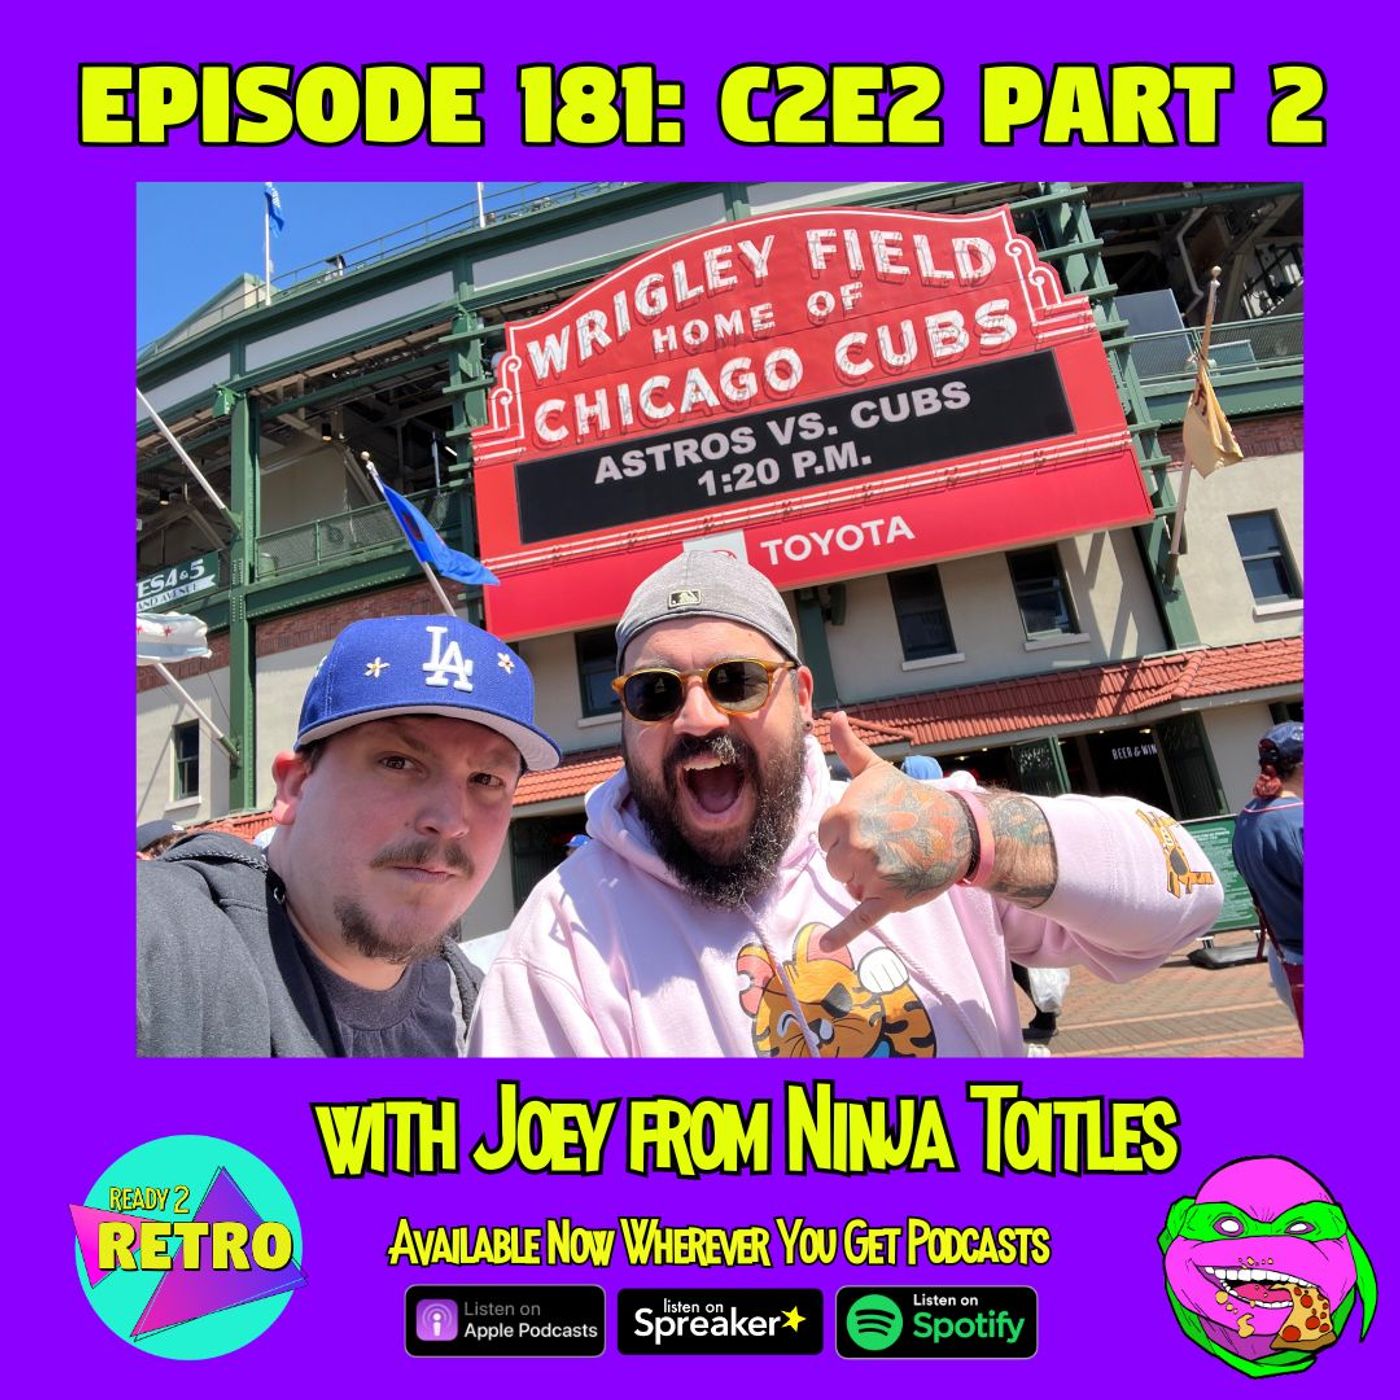 Episode 181: C2E2 Part 2 with Joey from Ninja Toitles